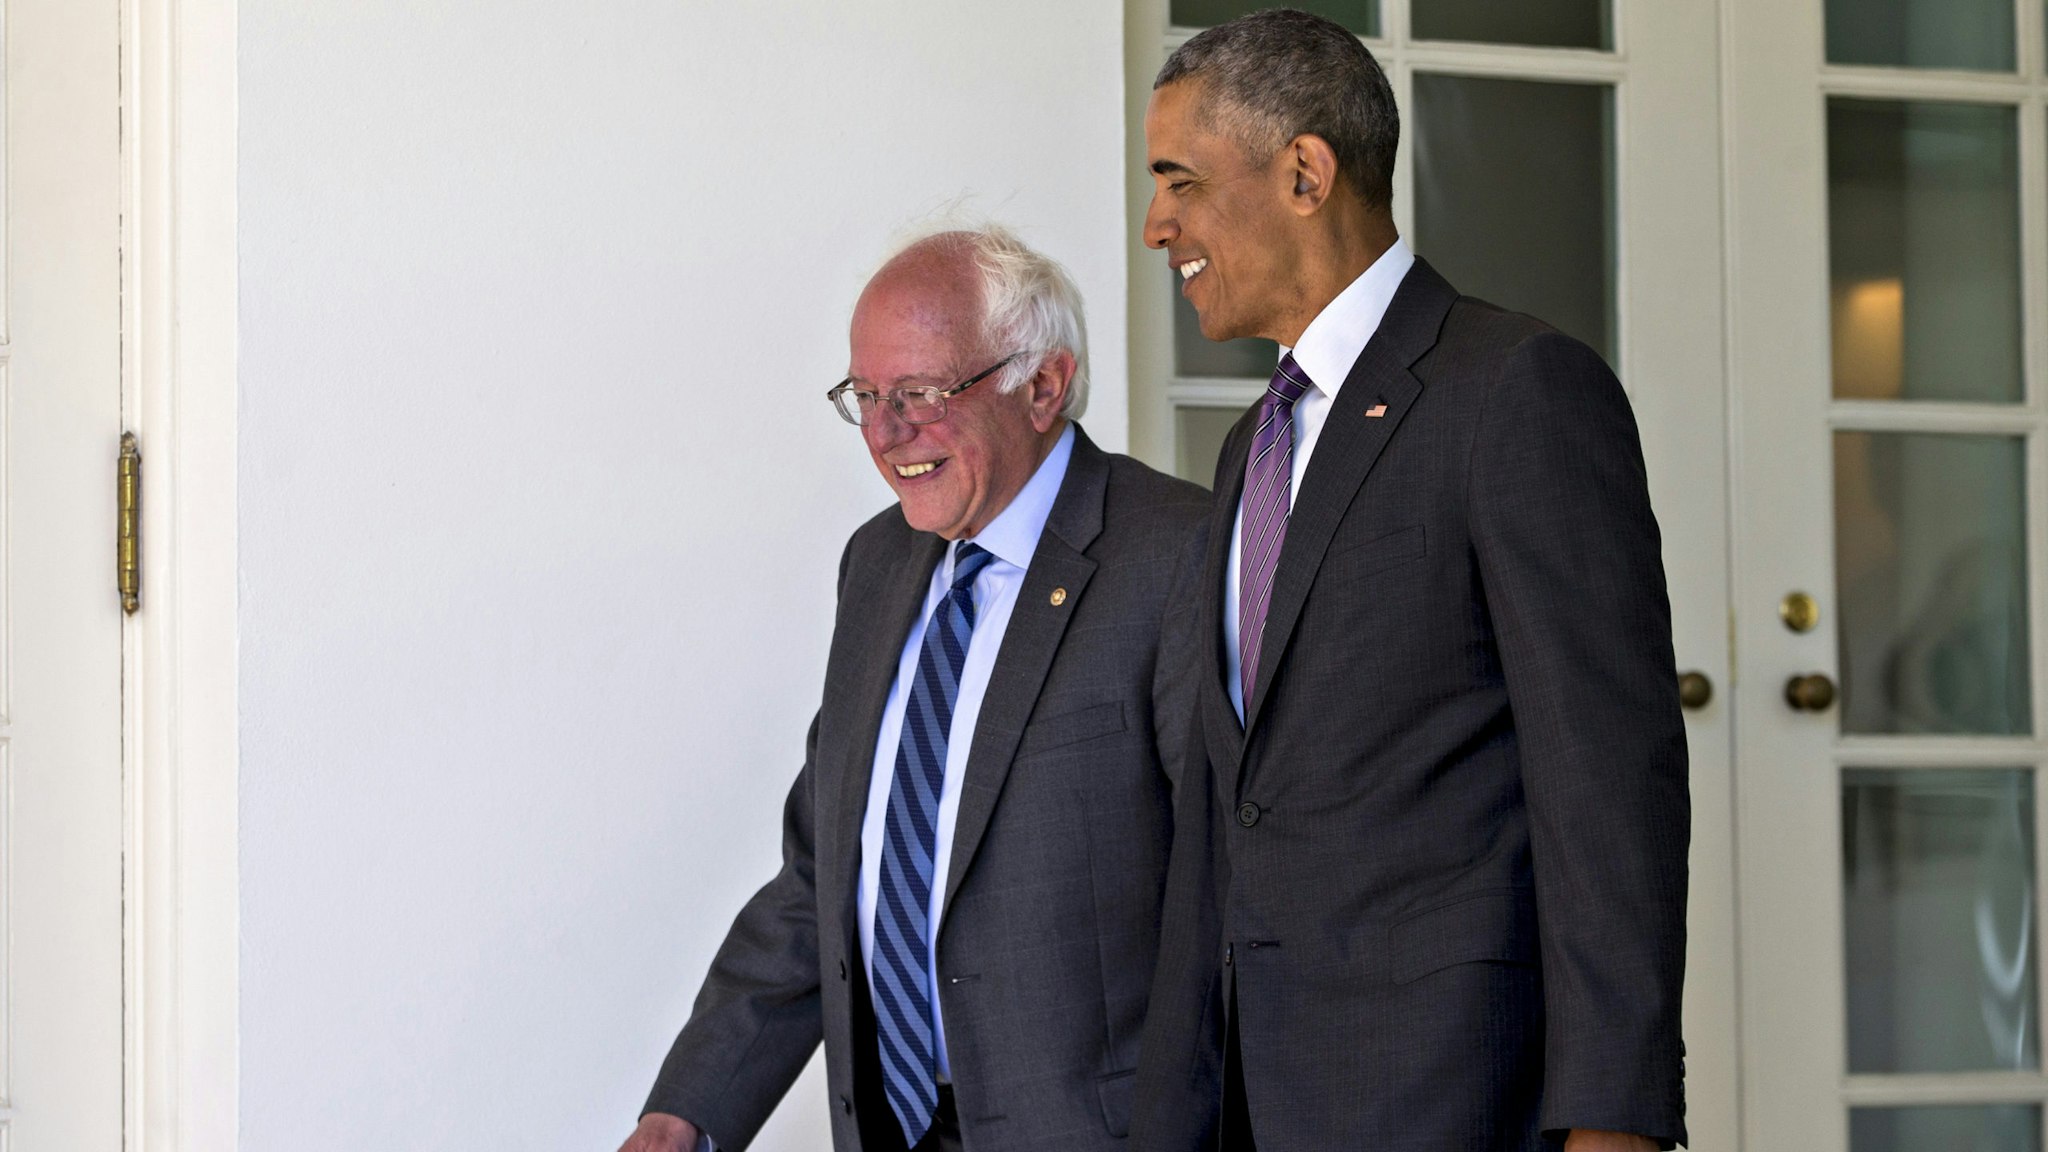 U.S. President Barack Obama, right, and Senator Bernie Sanders, an independent from Vermont and 2016 Democratic presidential candidate, walk to the Oval Office of the White House in Washington, D.C., U.S., on Thursday, June 9, 2016. Obama said yesterday he expects Democrats to unify soon behind their presumptive presidential nominee, Hillary Clinton, and that her divisive primary contest with Sanders was healthy for the party.